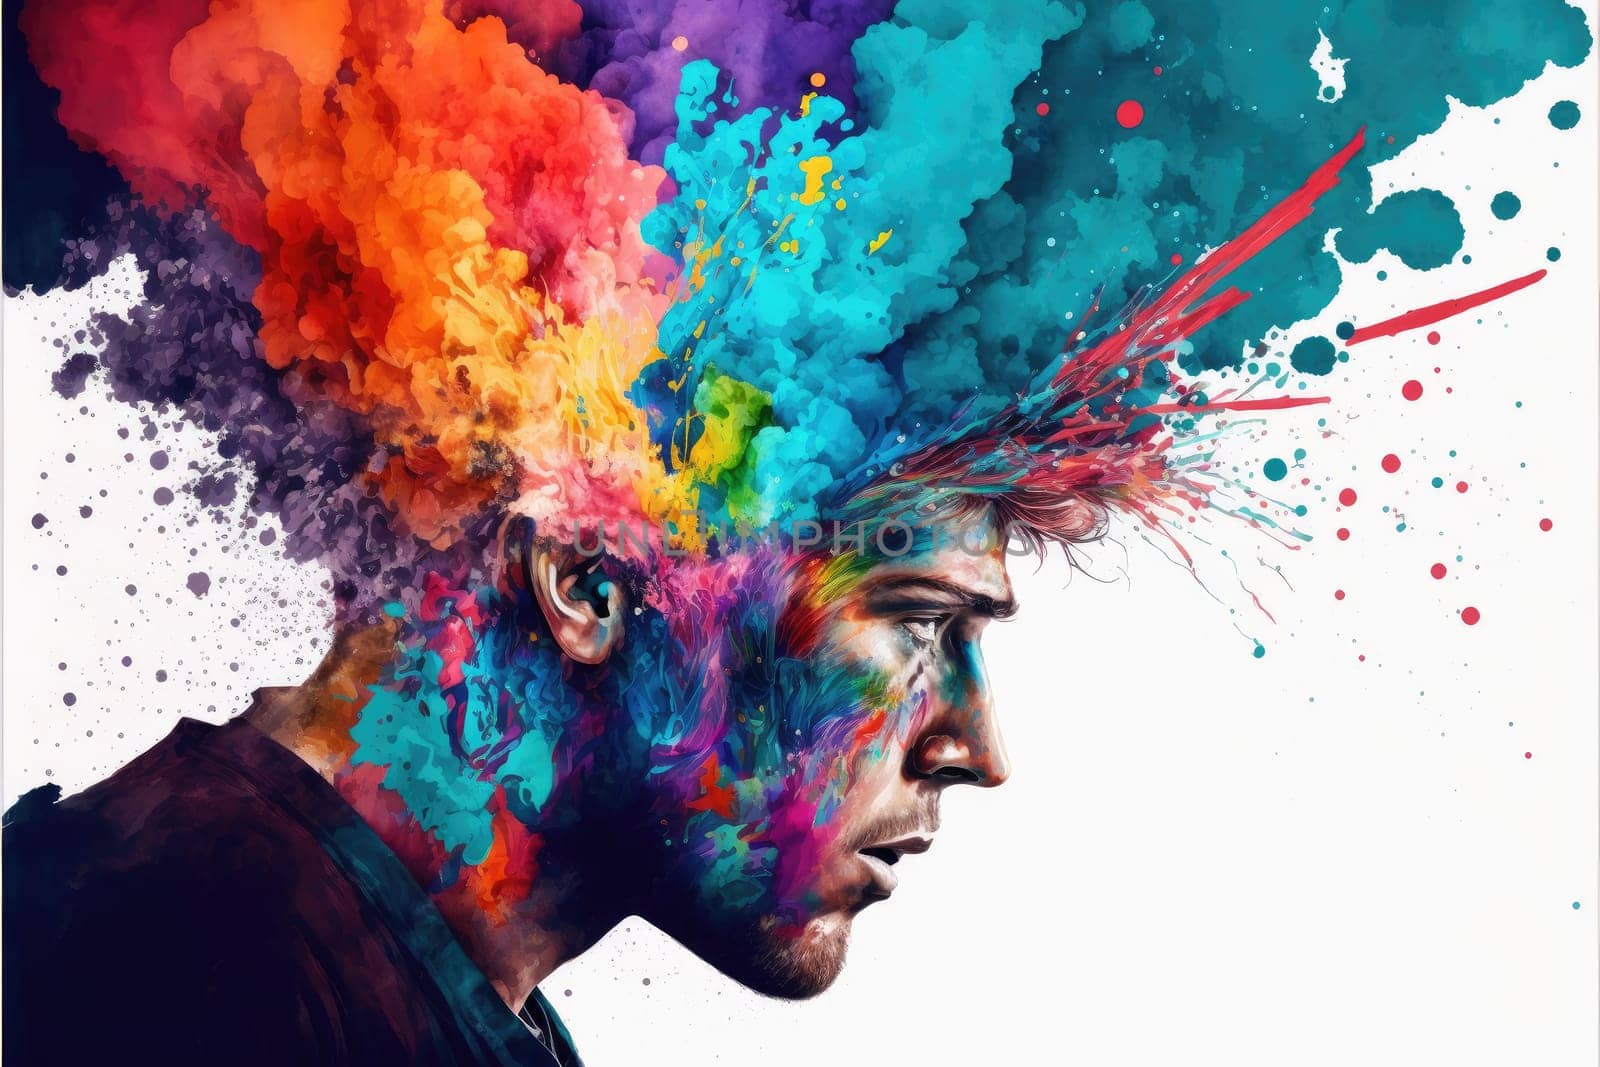 Explosion of colors out of an artist in concept of creative and art inspiration by biancoblue